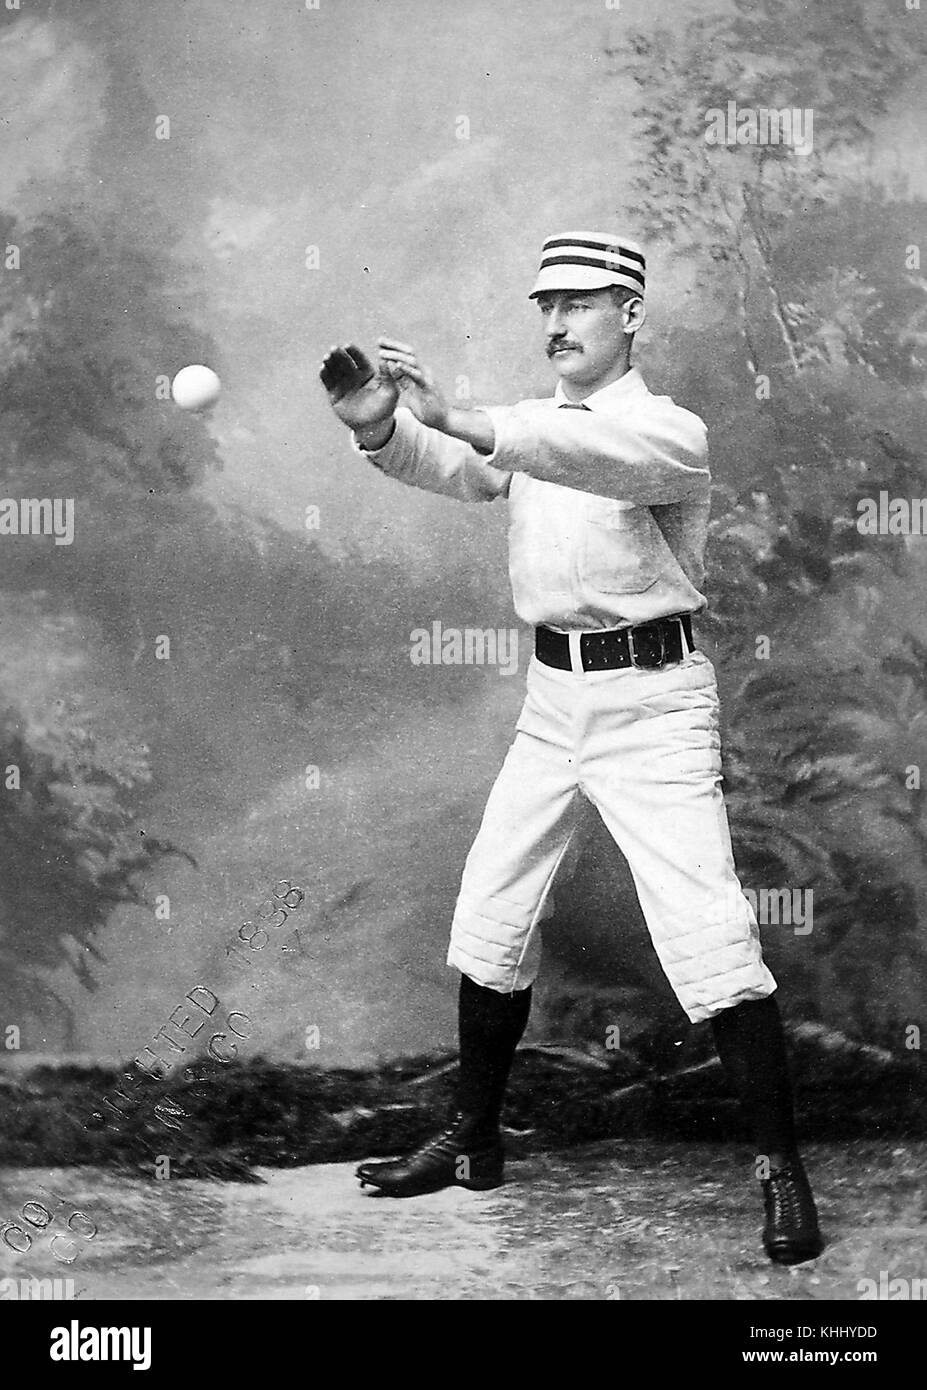 Picture of 19th century unidentified baseball player in catching form, by Gilbert Bacon, Philadelphia, 1838. From the New York Public Library. Stock Photo